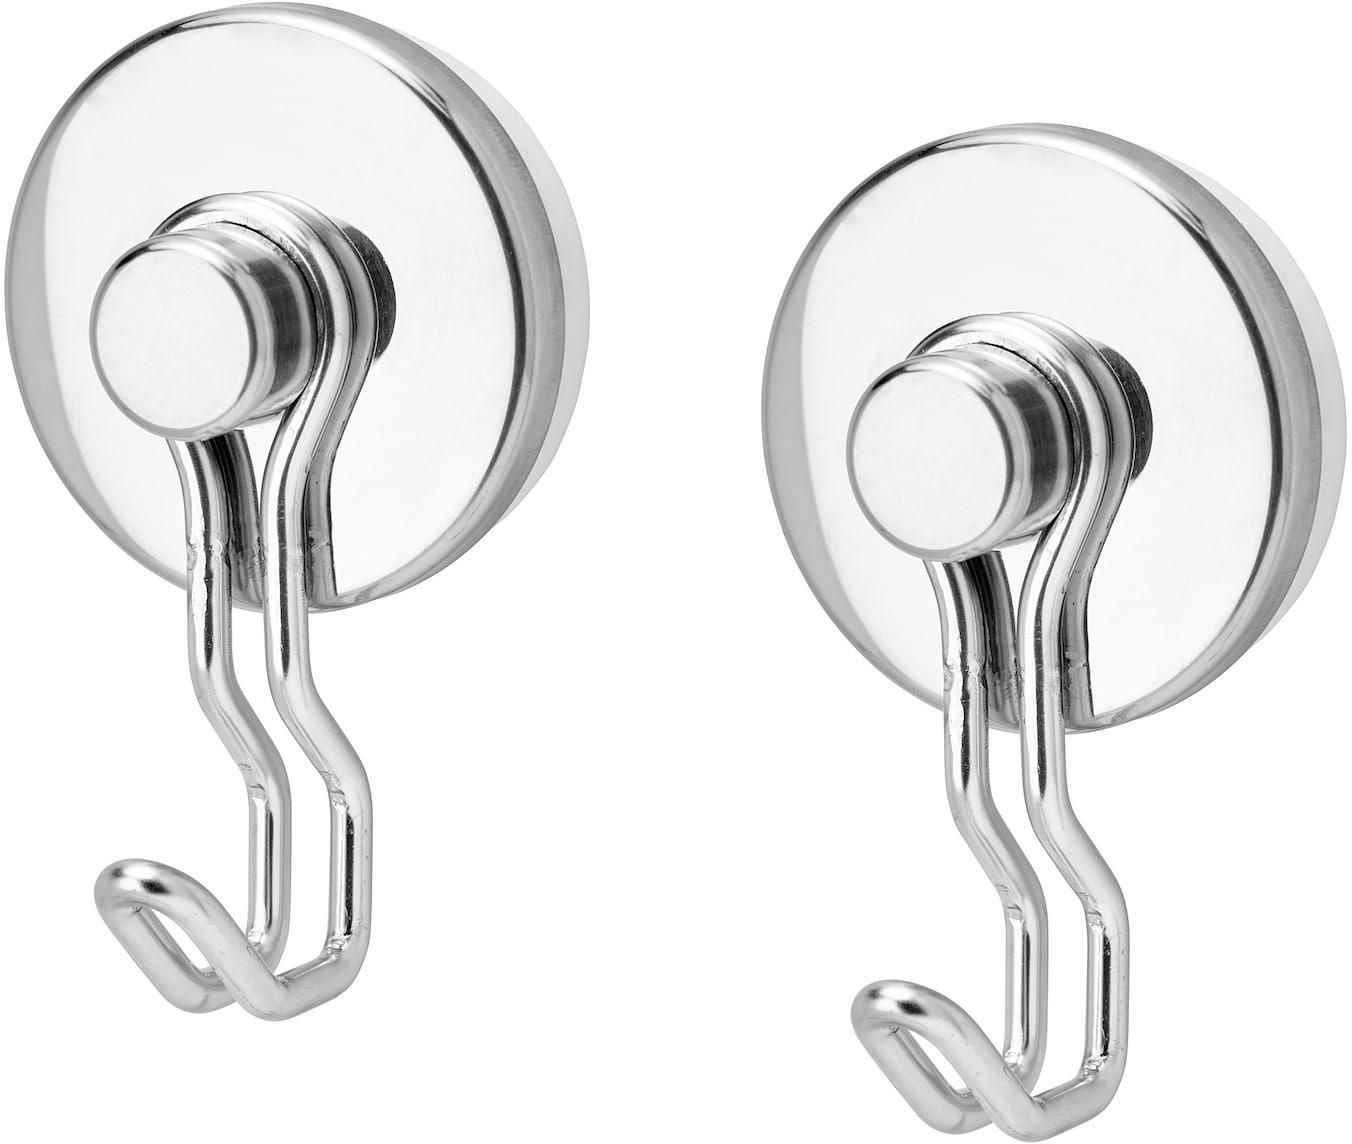 KROKFJORDEN Hook with suction cup - zinc plated